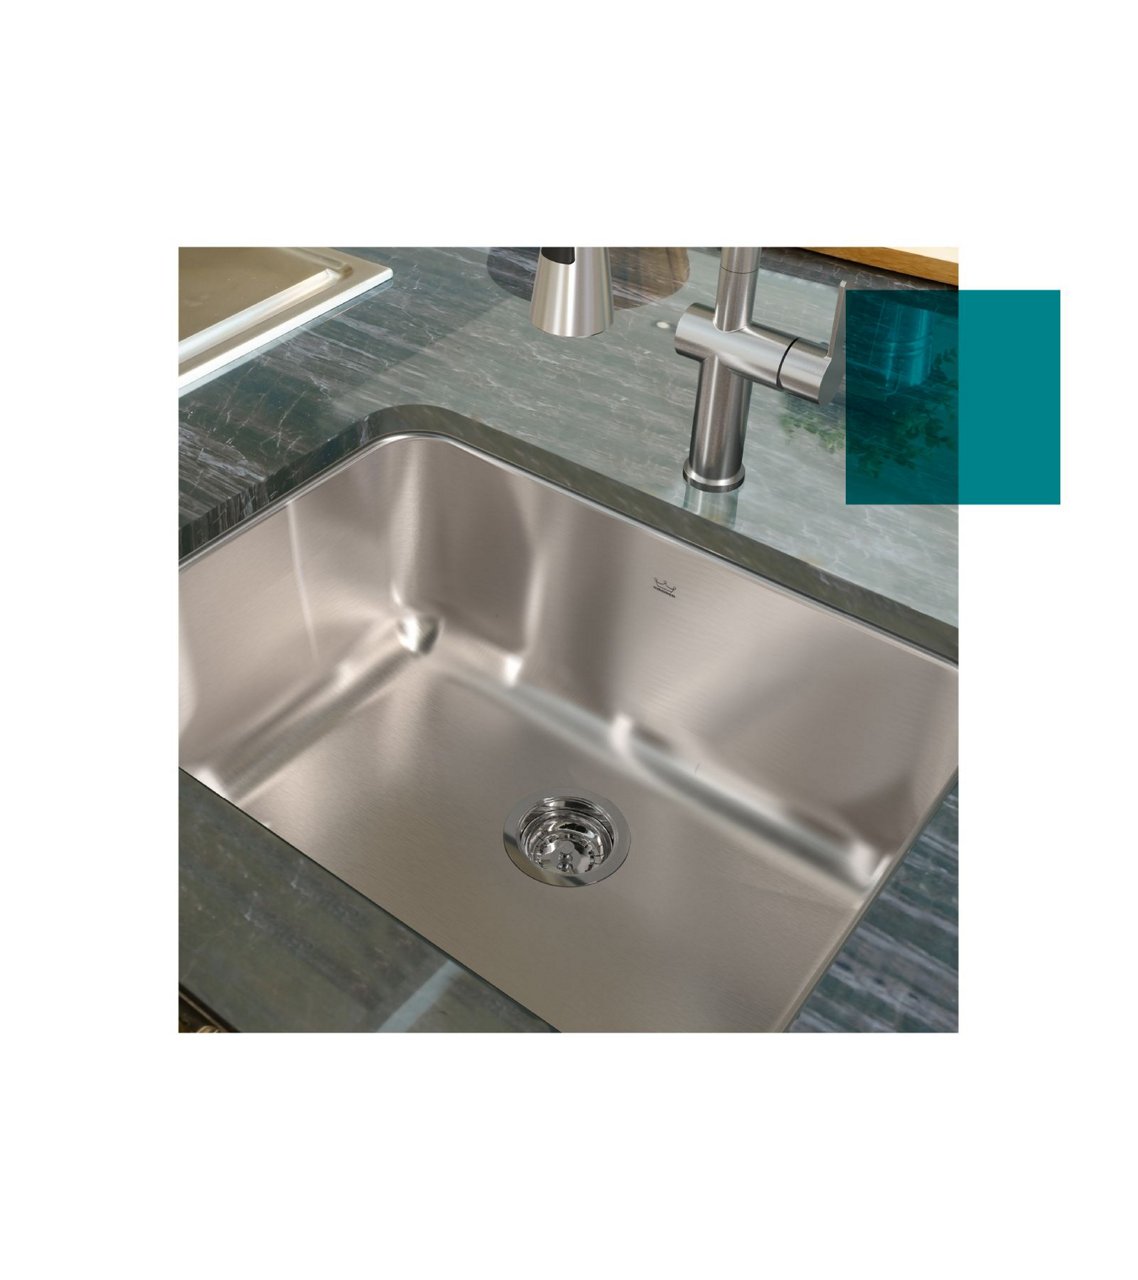 single bowl stainless steel Kindred sink in a green marble countertop